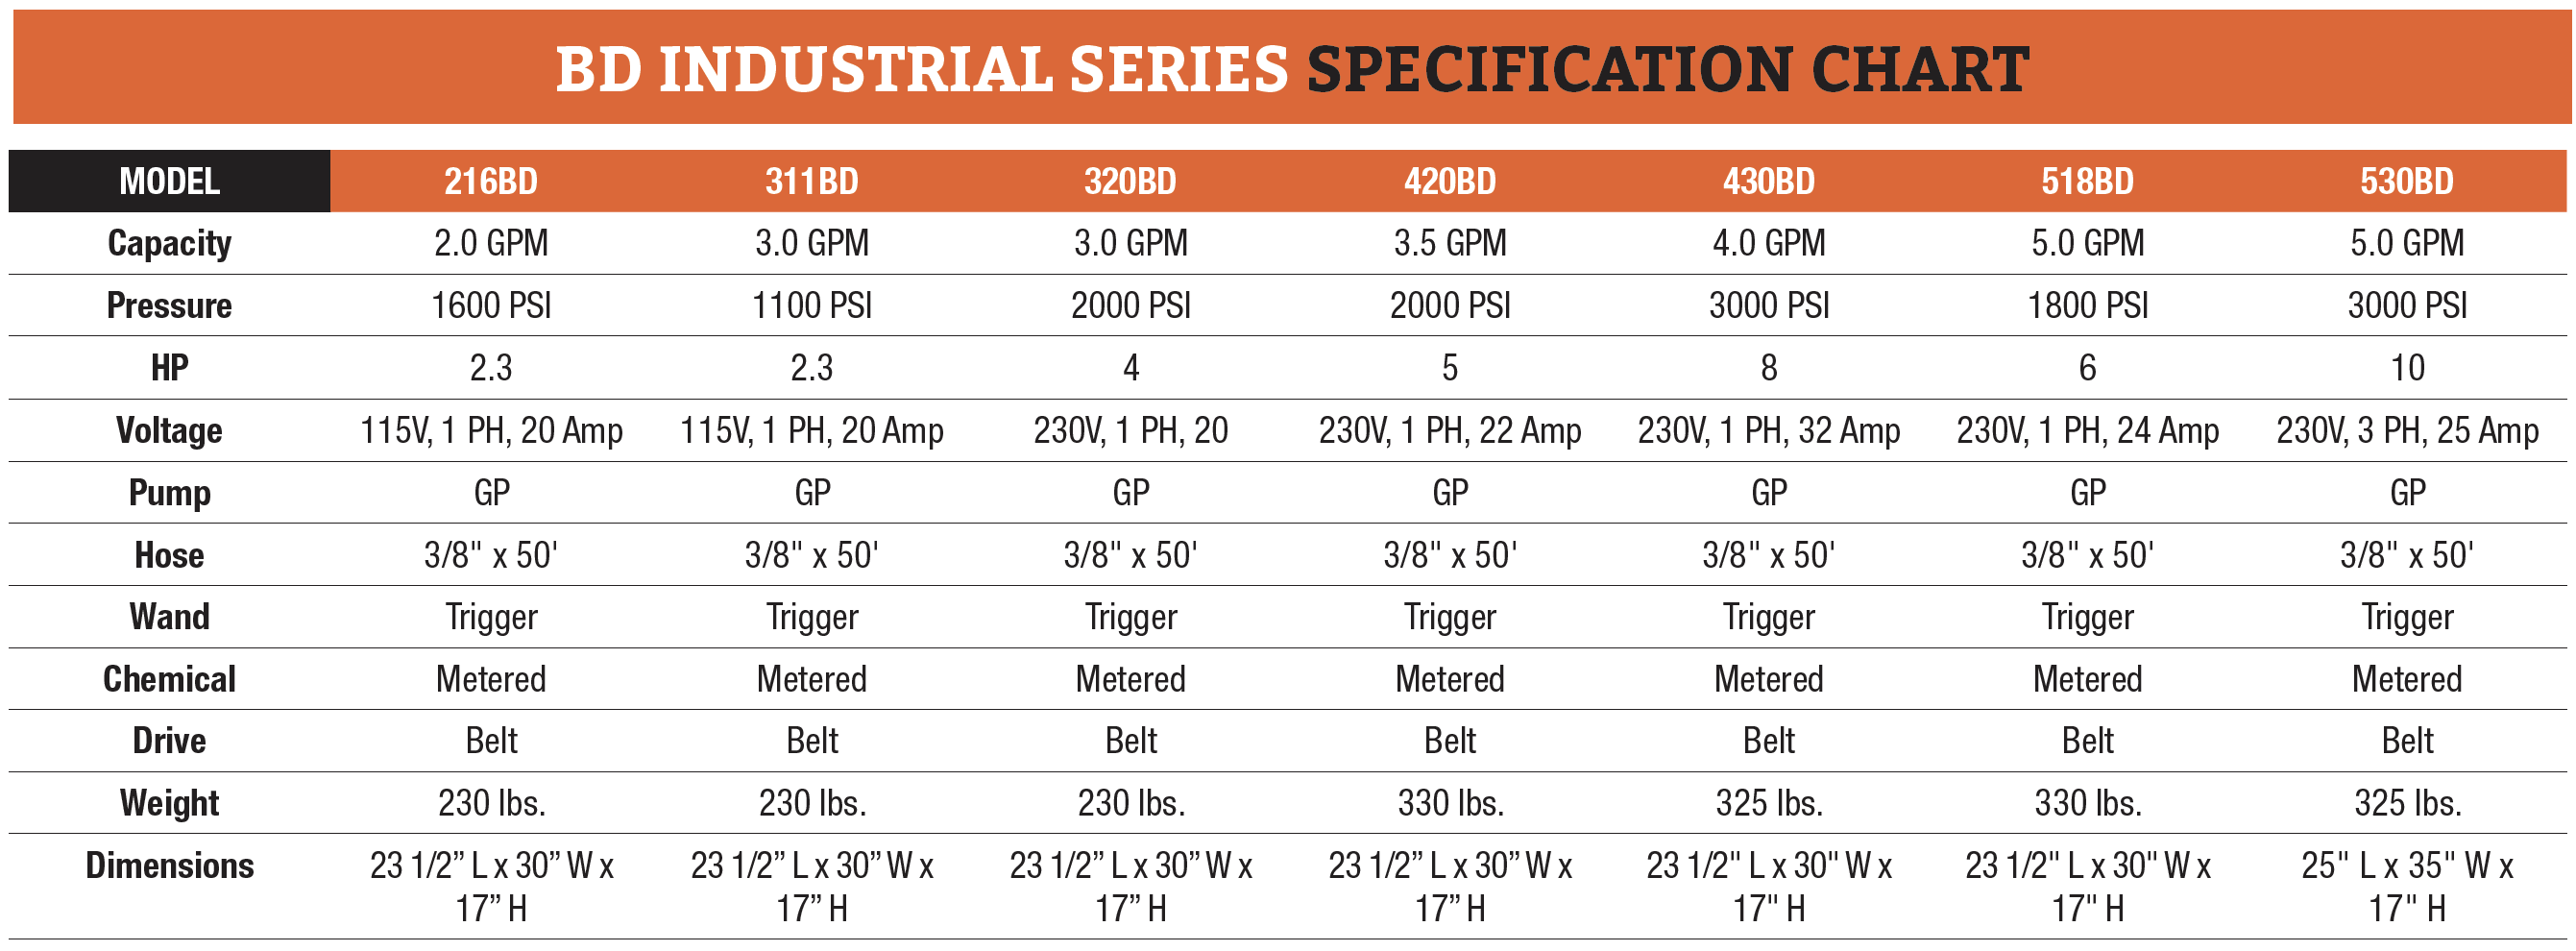 BD-industrial-series-specification-chart